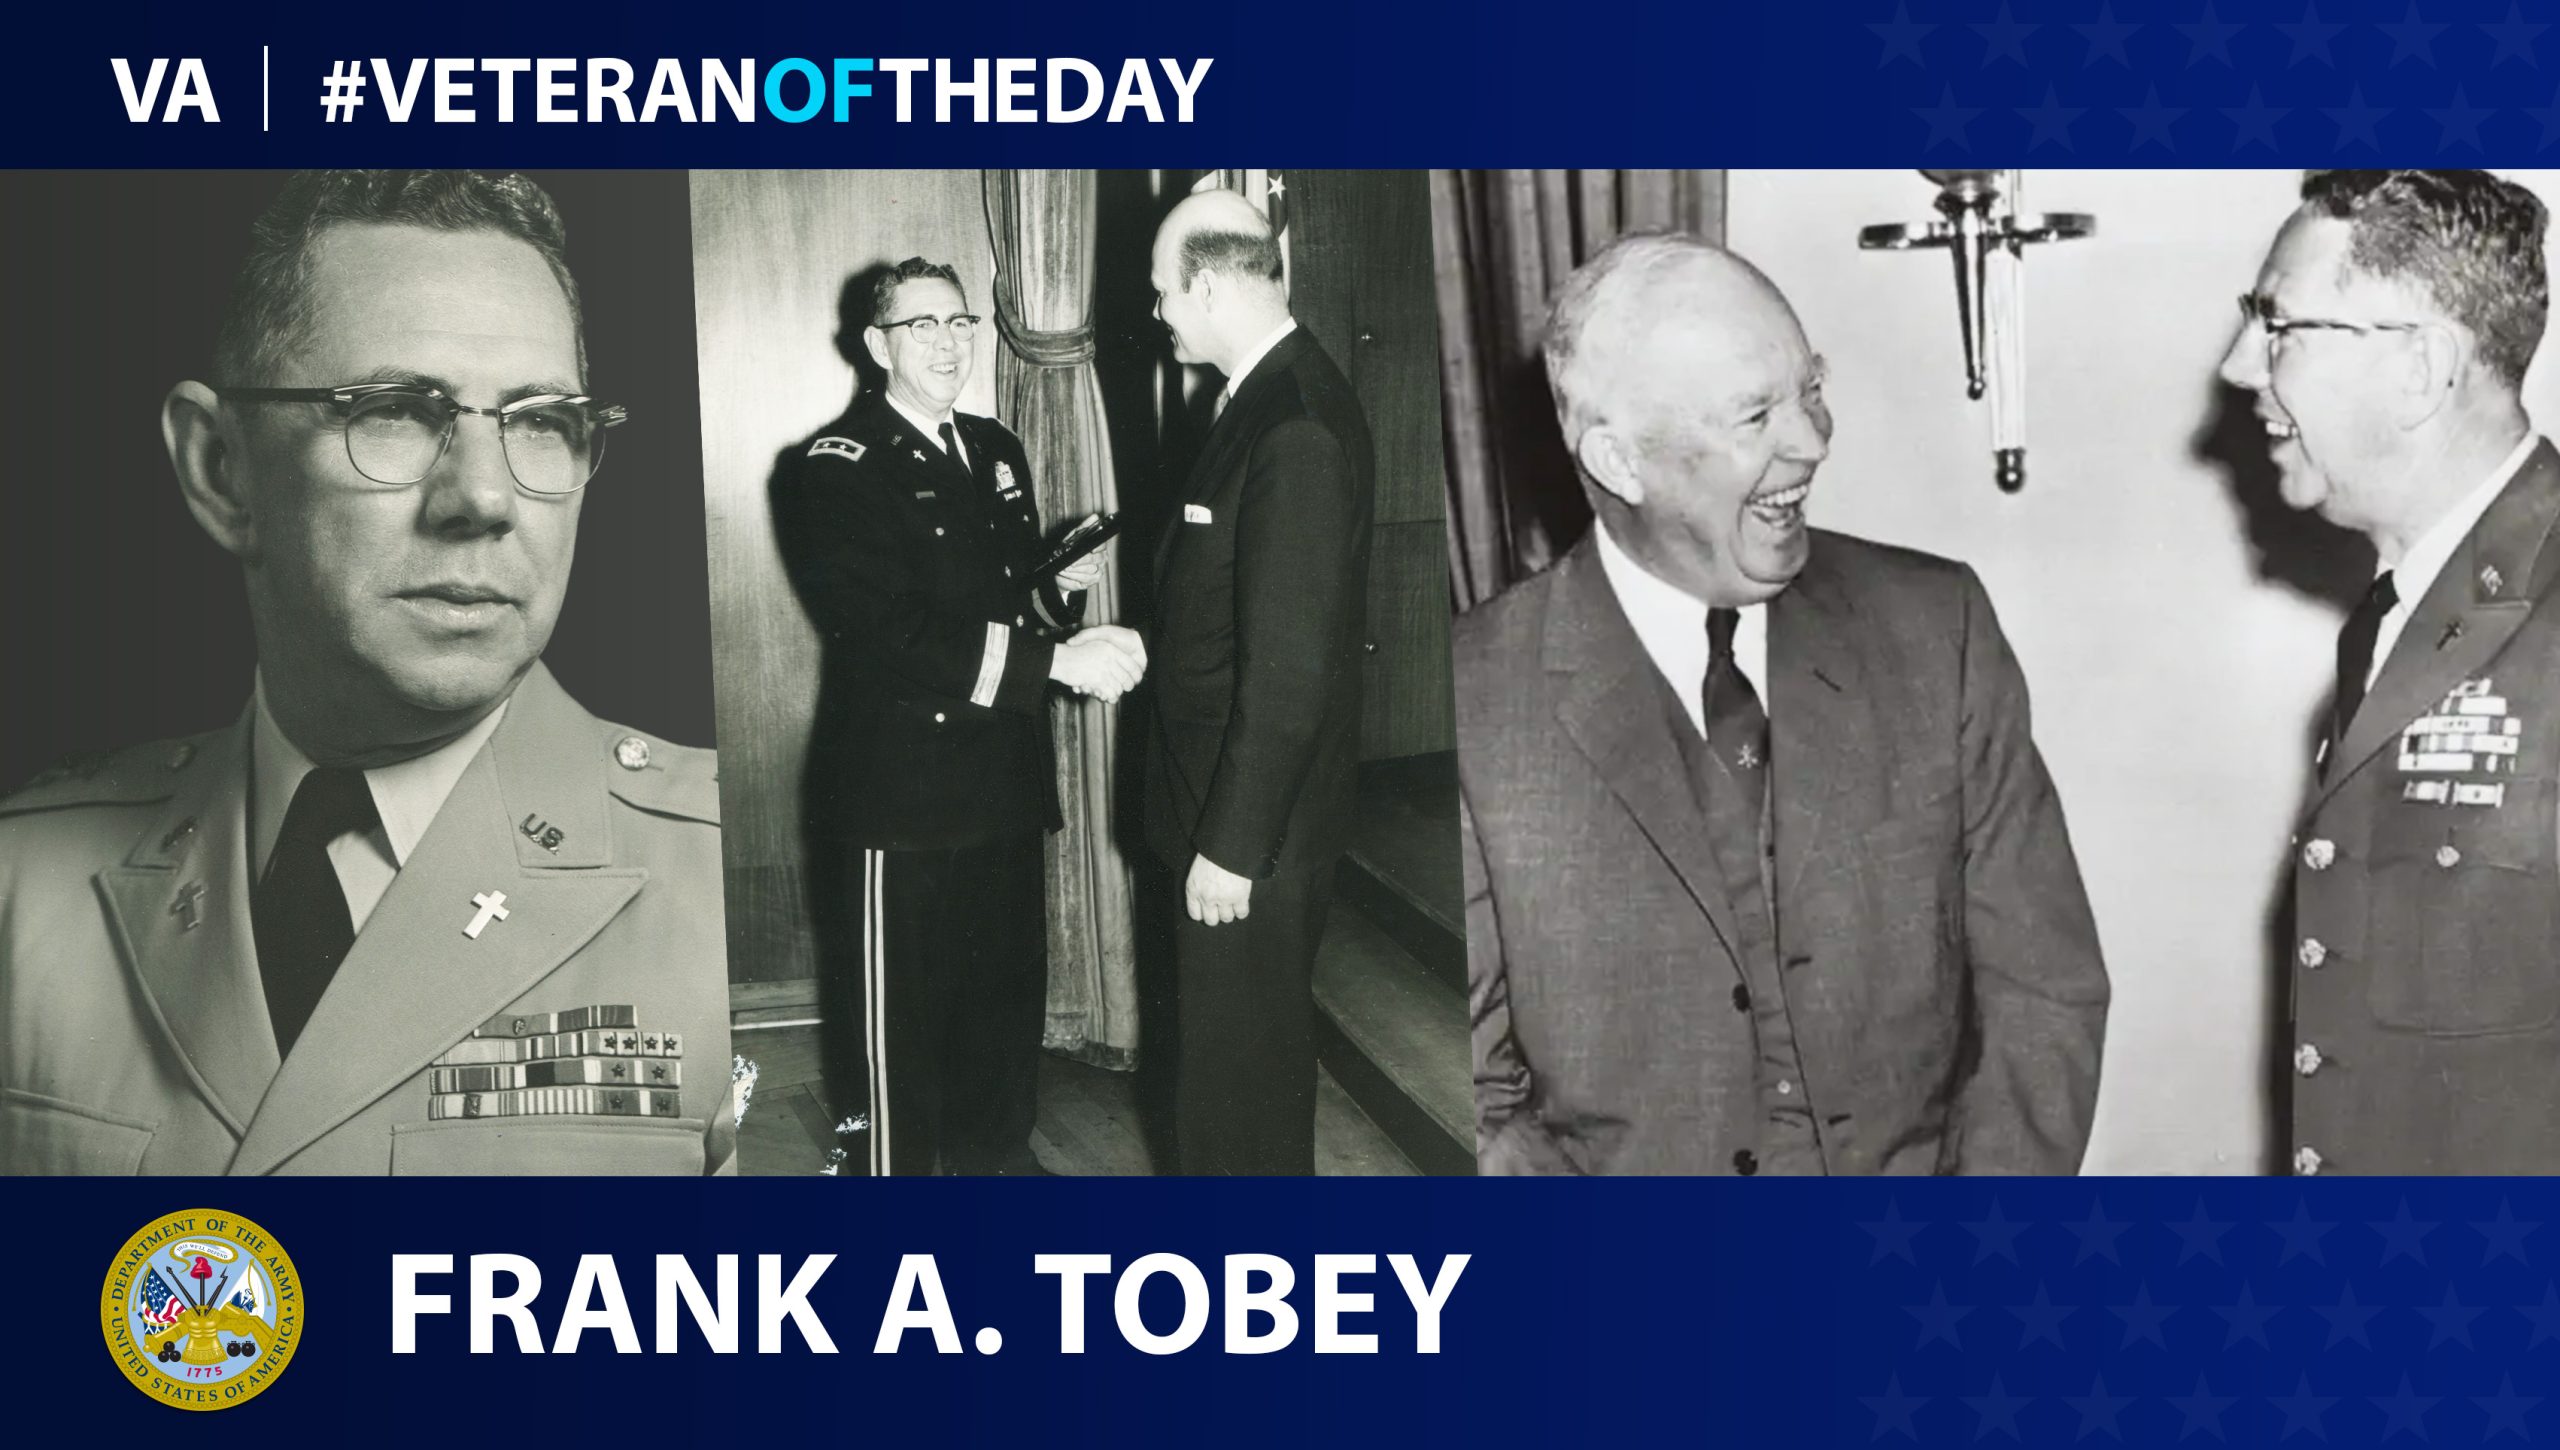 Army Veteran Frank A. Tobey is today’s Veteran of the Day.